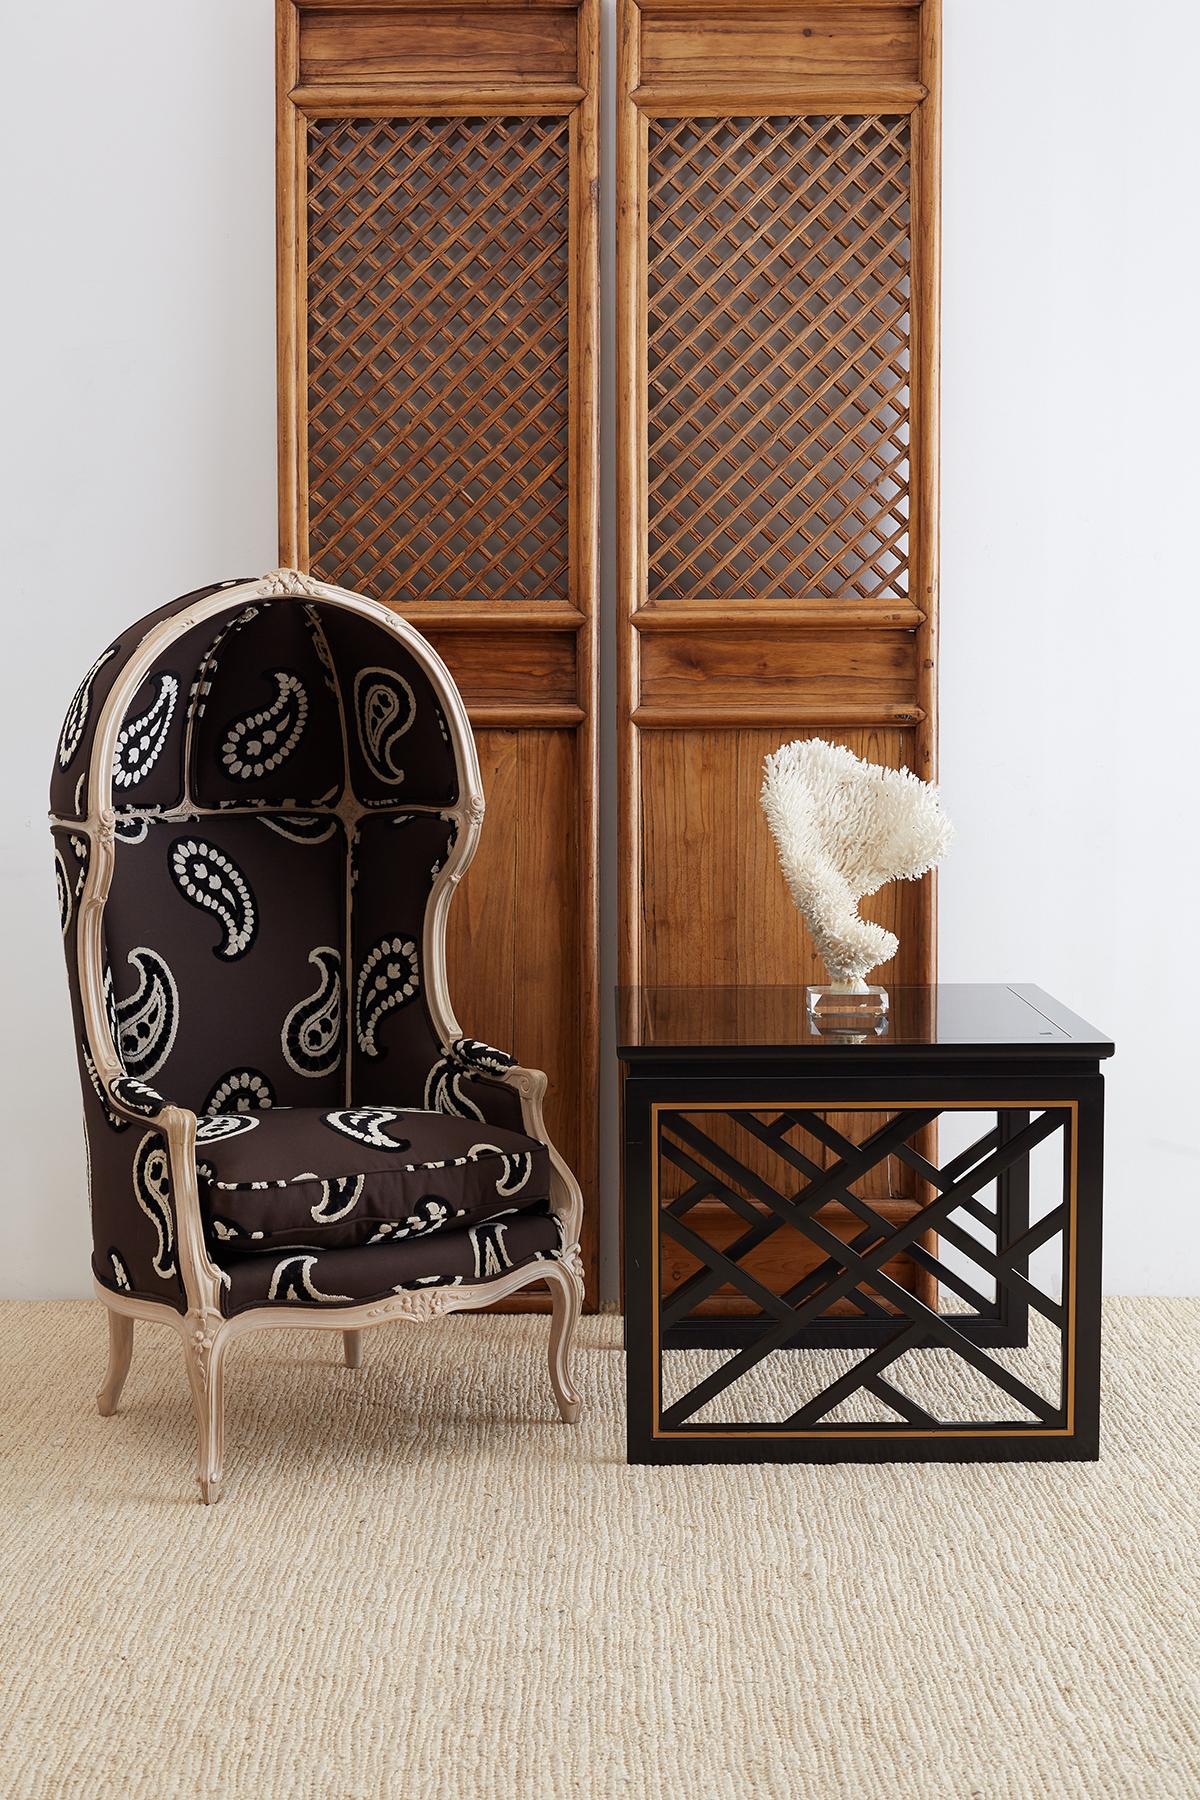 Pair of stunning black lacquered trellis tables by Carleton Varney for Kindel furniture. These fabulous tables feature Chinese Chippendale style geometric fretwork. Lattice panels on the sides with a gilt accent on the border. The open sides have an